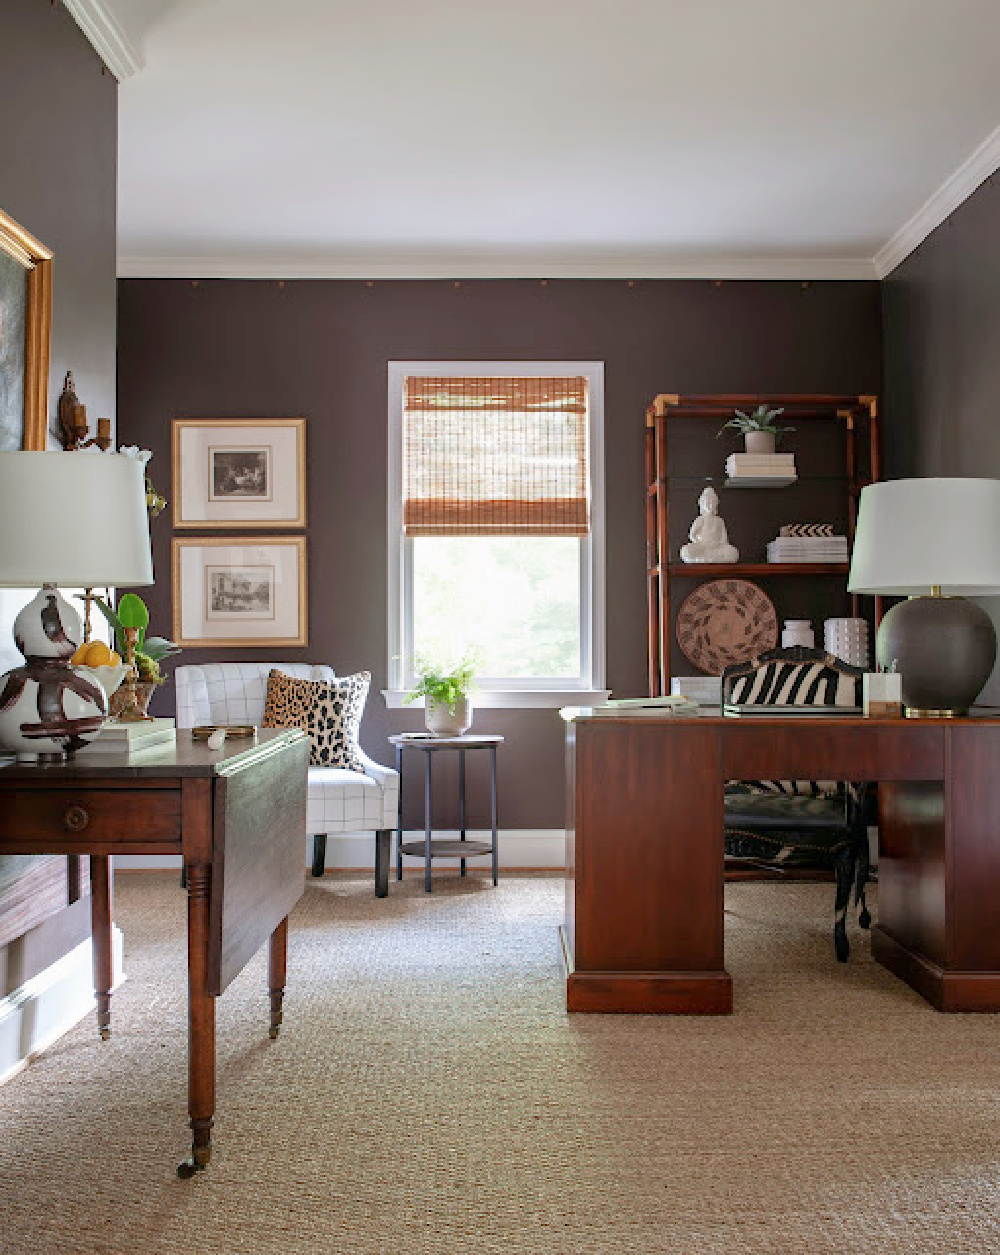 Home office in a traditional interior with moody bronze painted walls - Sherry Hart.